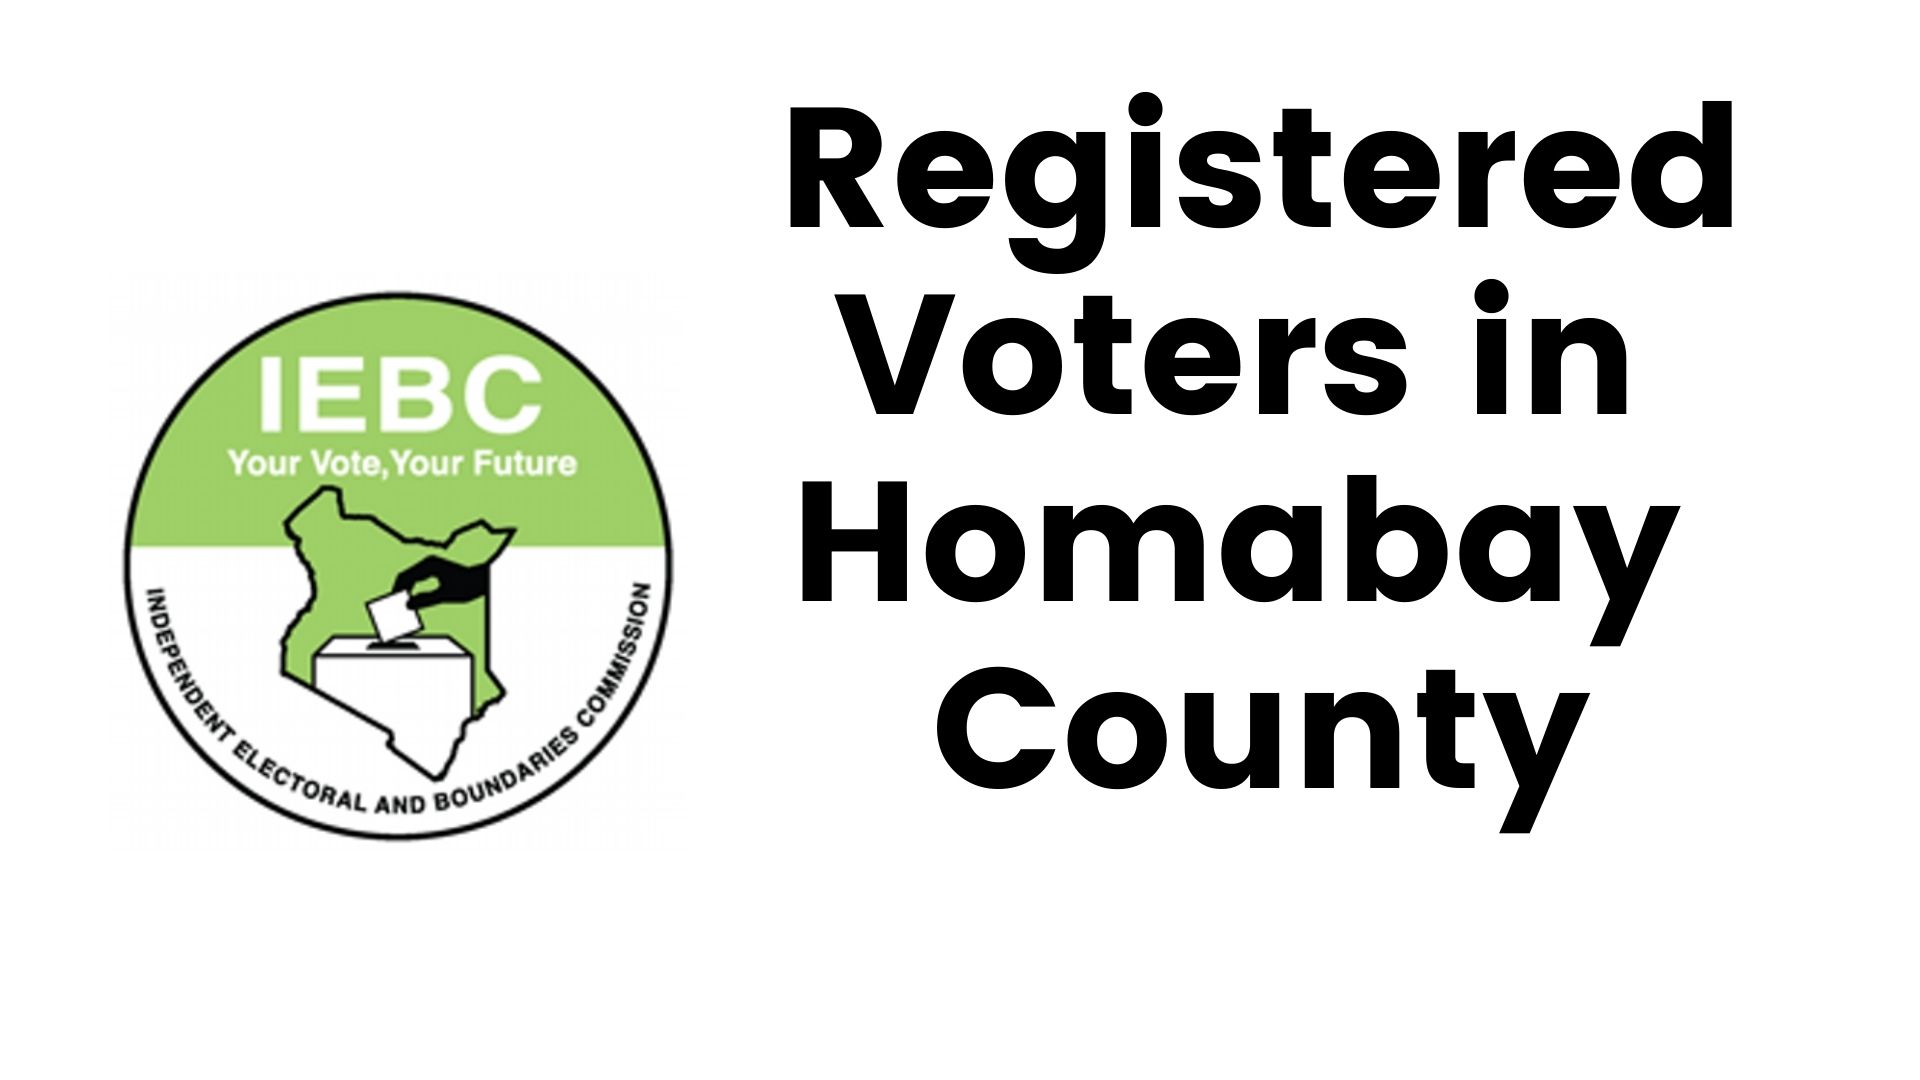 IEBC Homabay County Registered Voters